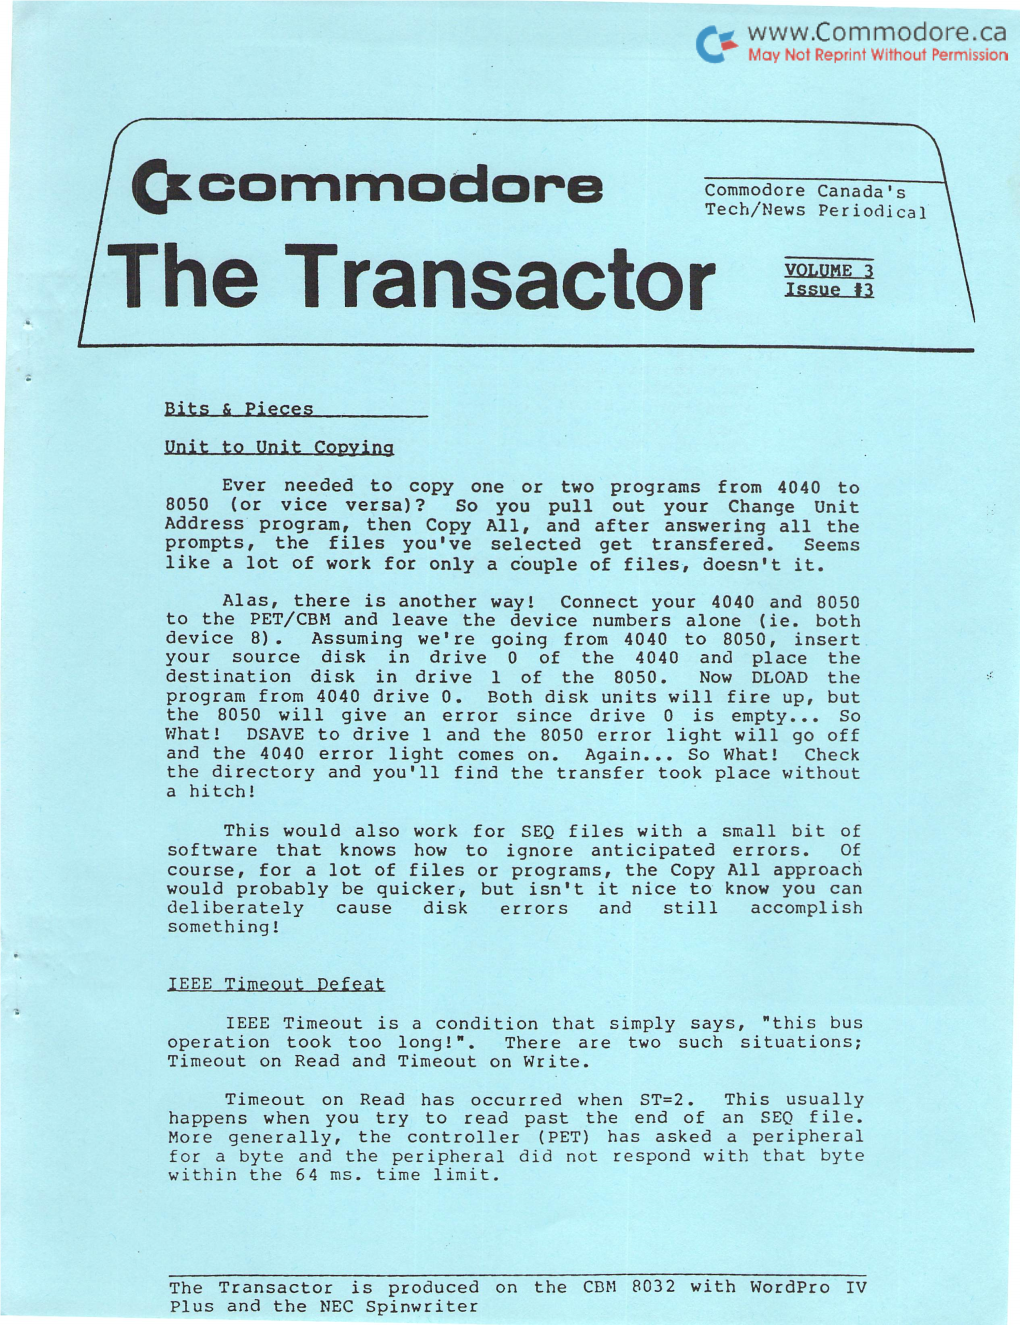 The Transactor Issue